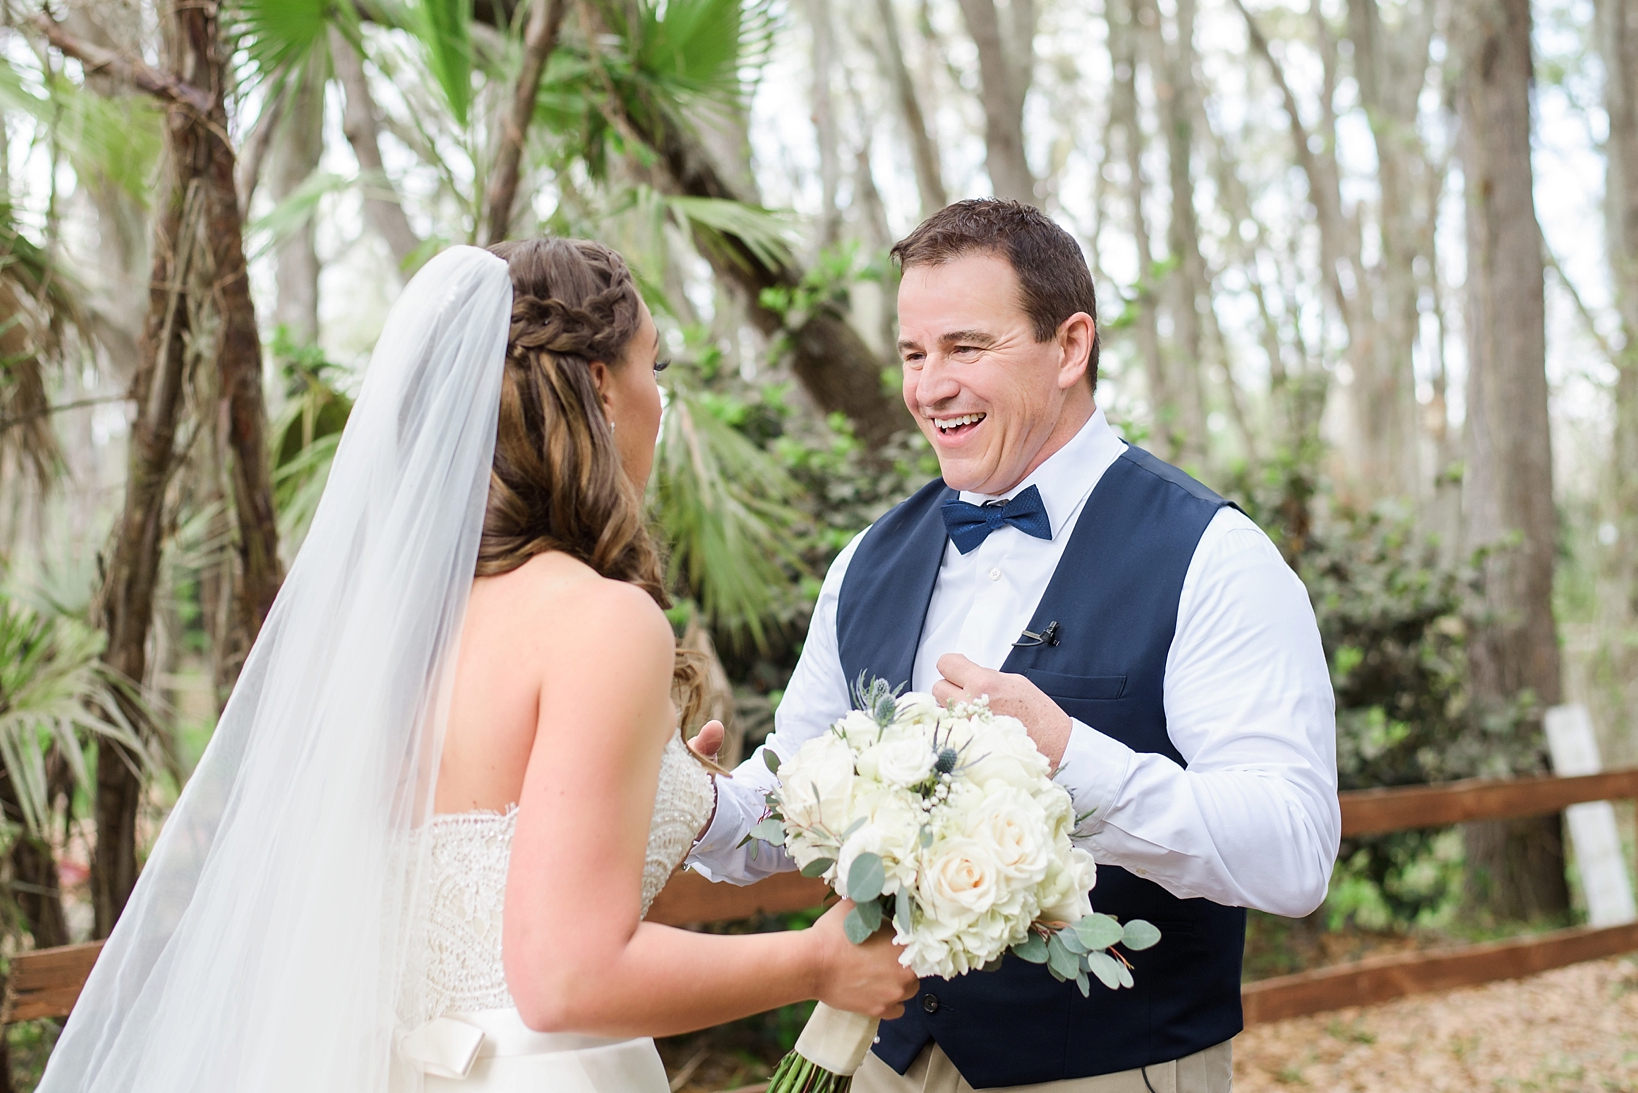 Groom seeing his bride for the first time on their wedding day by Sarah & Ben Photography